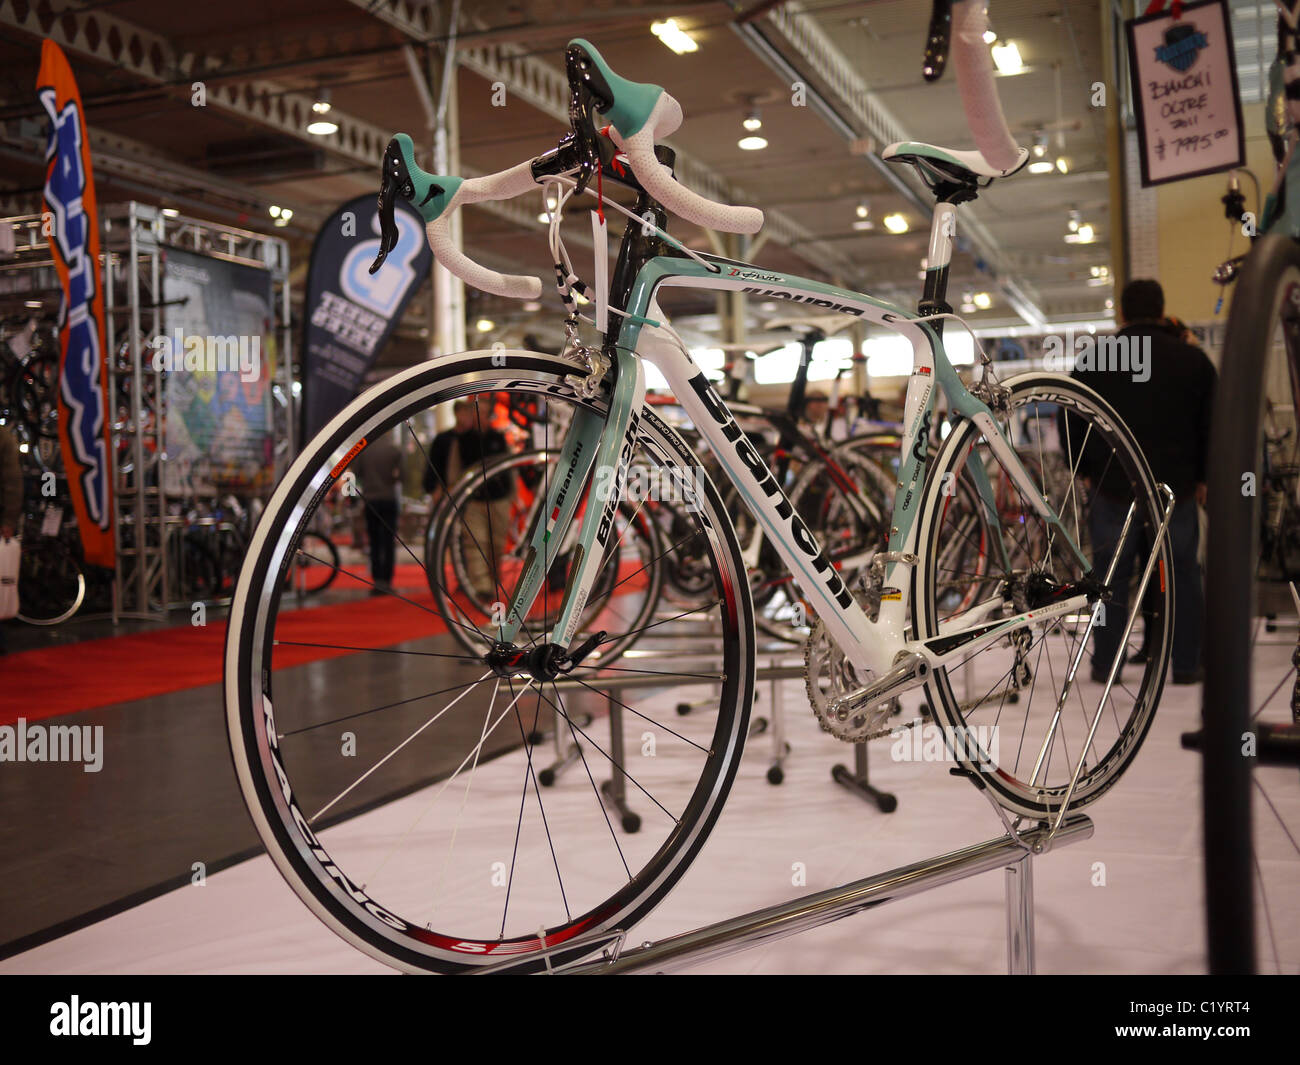 Expensive carbon fibre racing bicycles on display Stock Photo